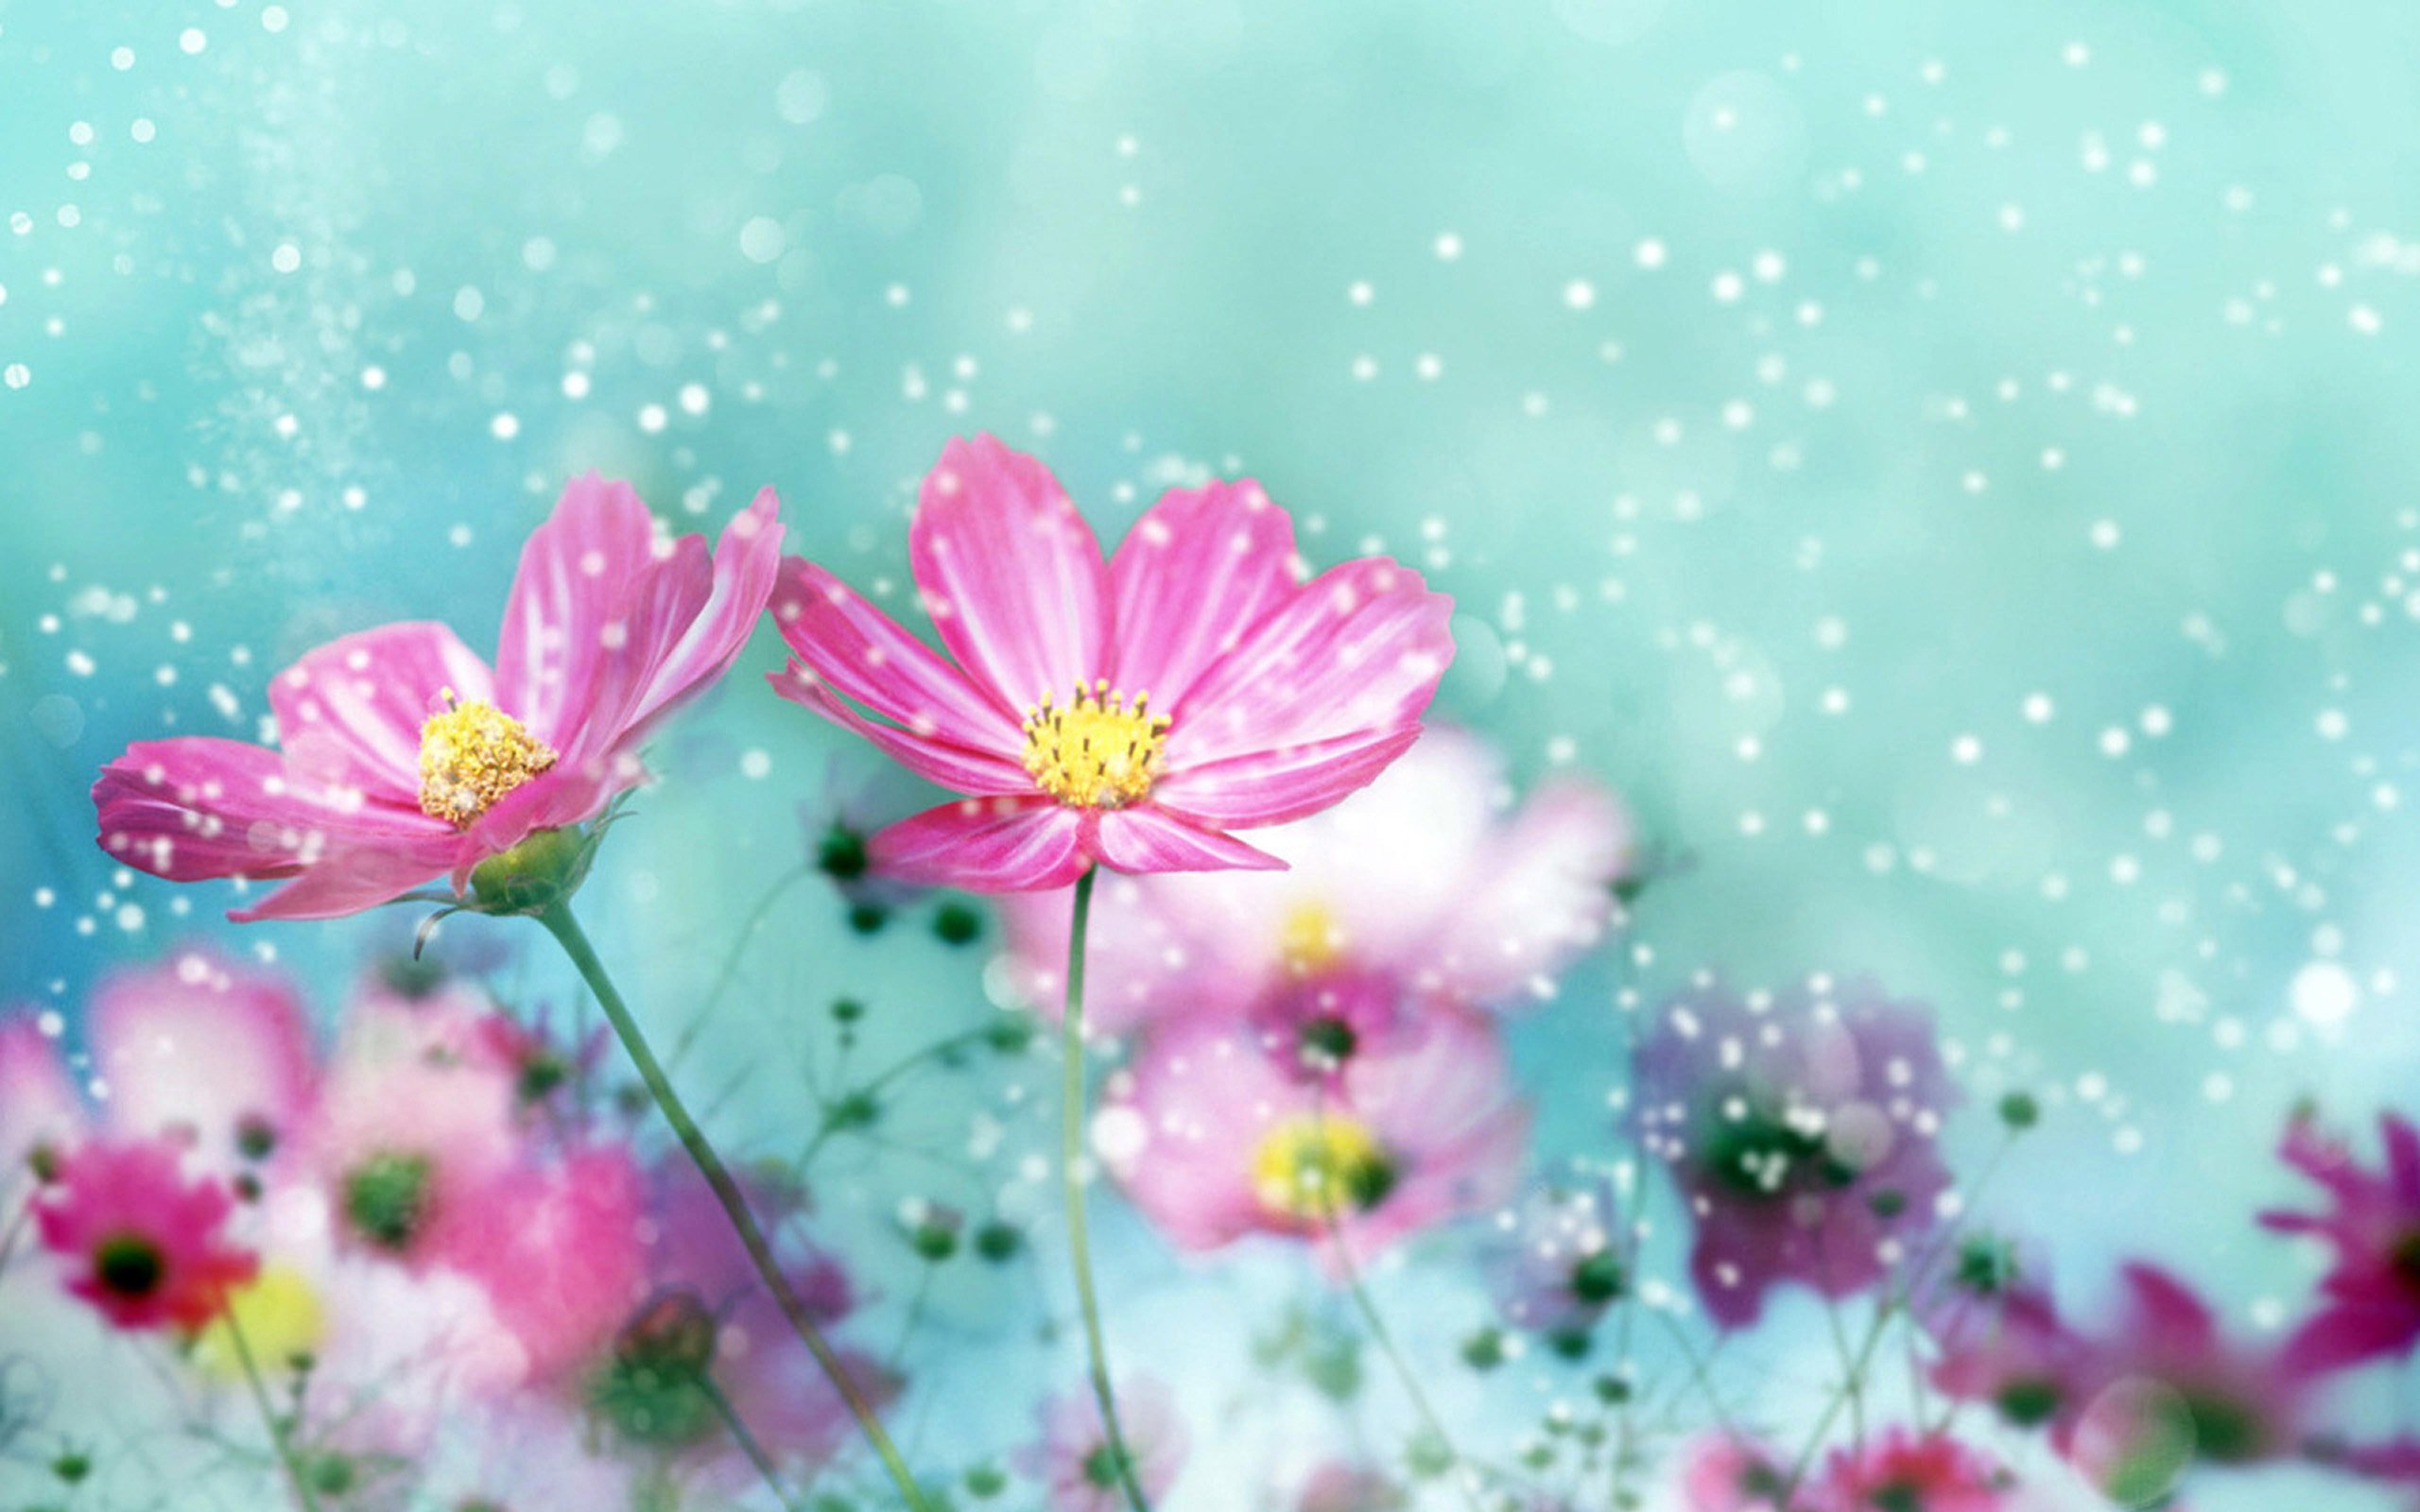 flower wallpaper backgrounds   AmusingFuncom Pictures and Graphics